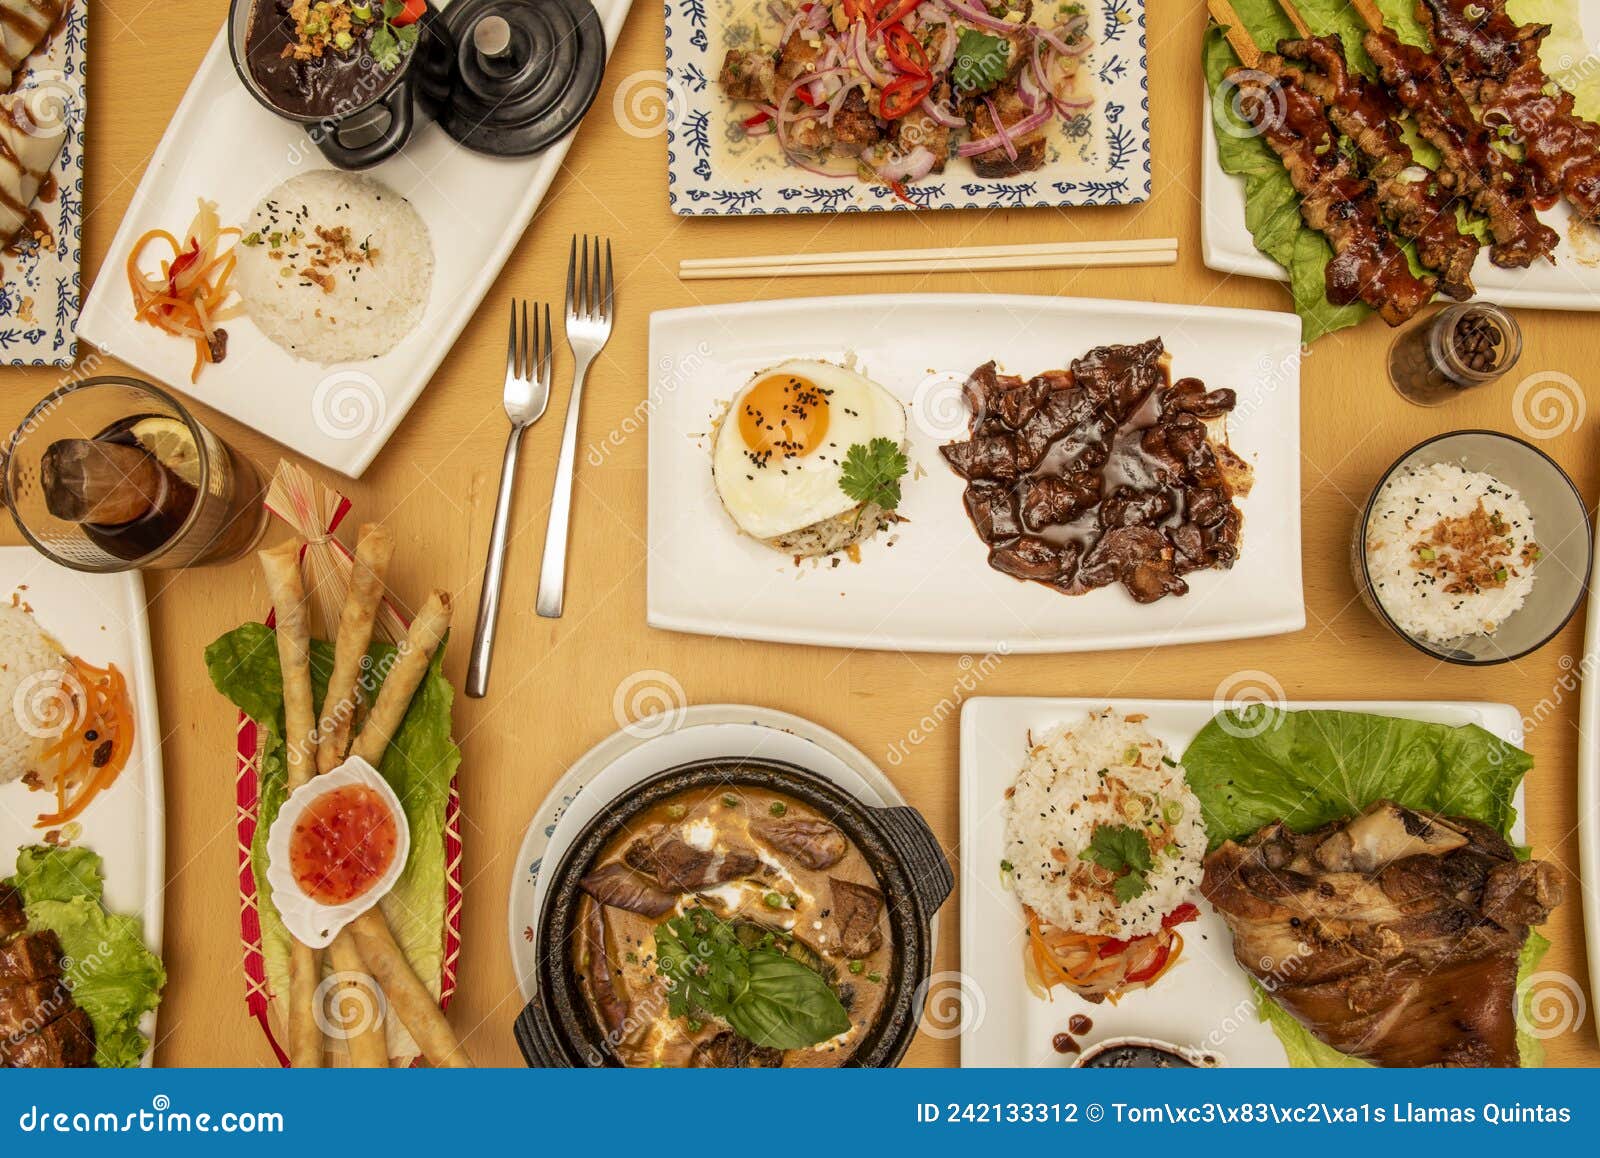 top view image of asian food dishes, tagalog, spring rolls, roast beef